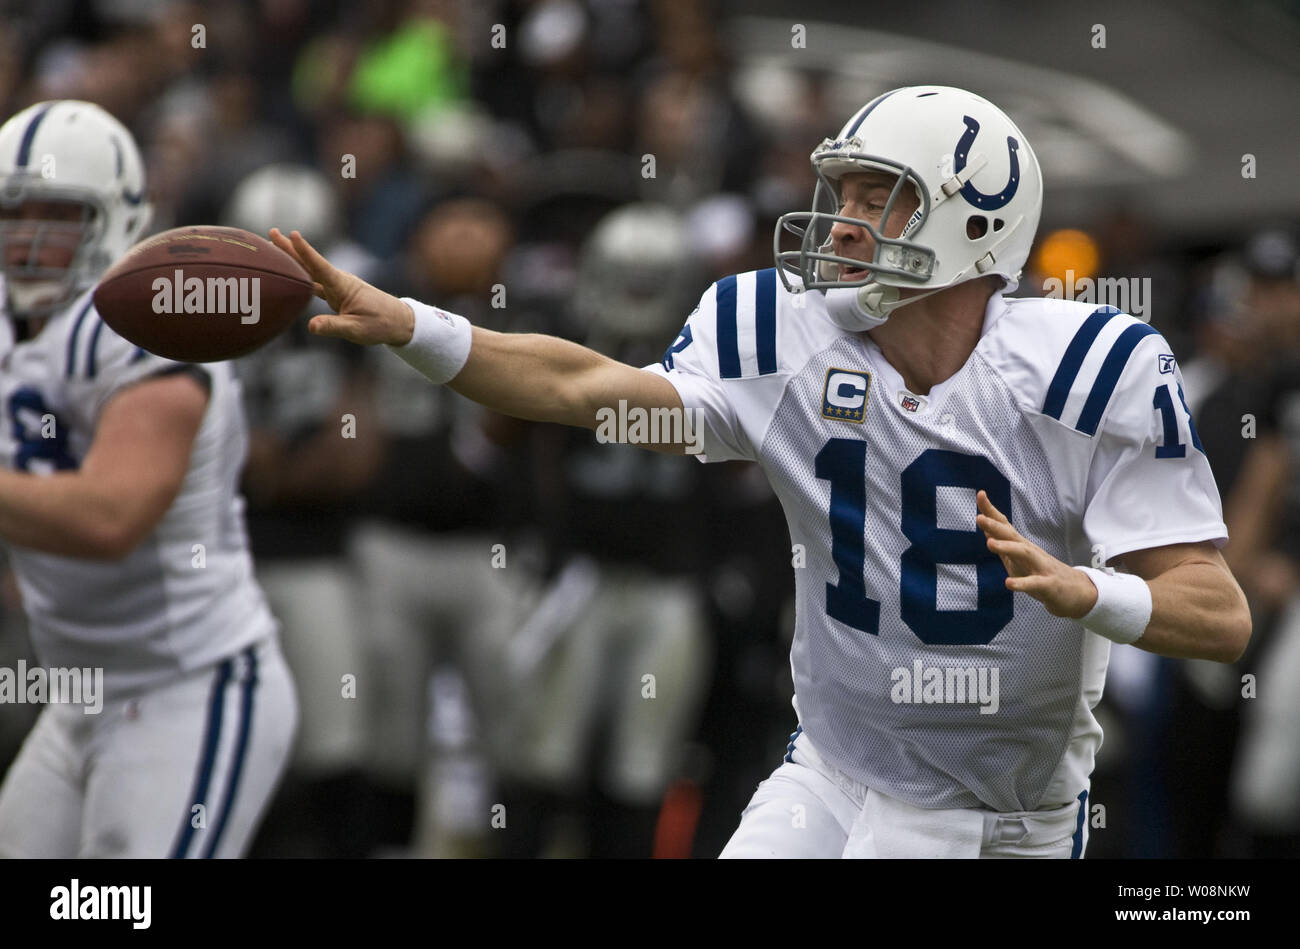 Indianapolis Colts Peyton Manning tosses a shuffle pass against the  Oakland Raiders at the Oakland Coliseum in Oakland, California on December 26, 2010.  The Colts defeated the Raiders 31-26.     UPI/Terry Schmitt Stock Photo